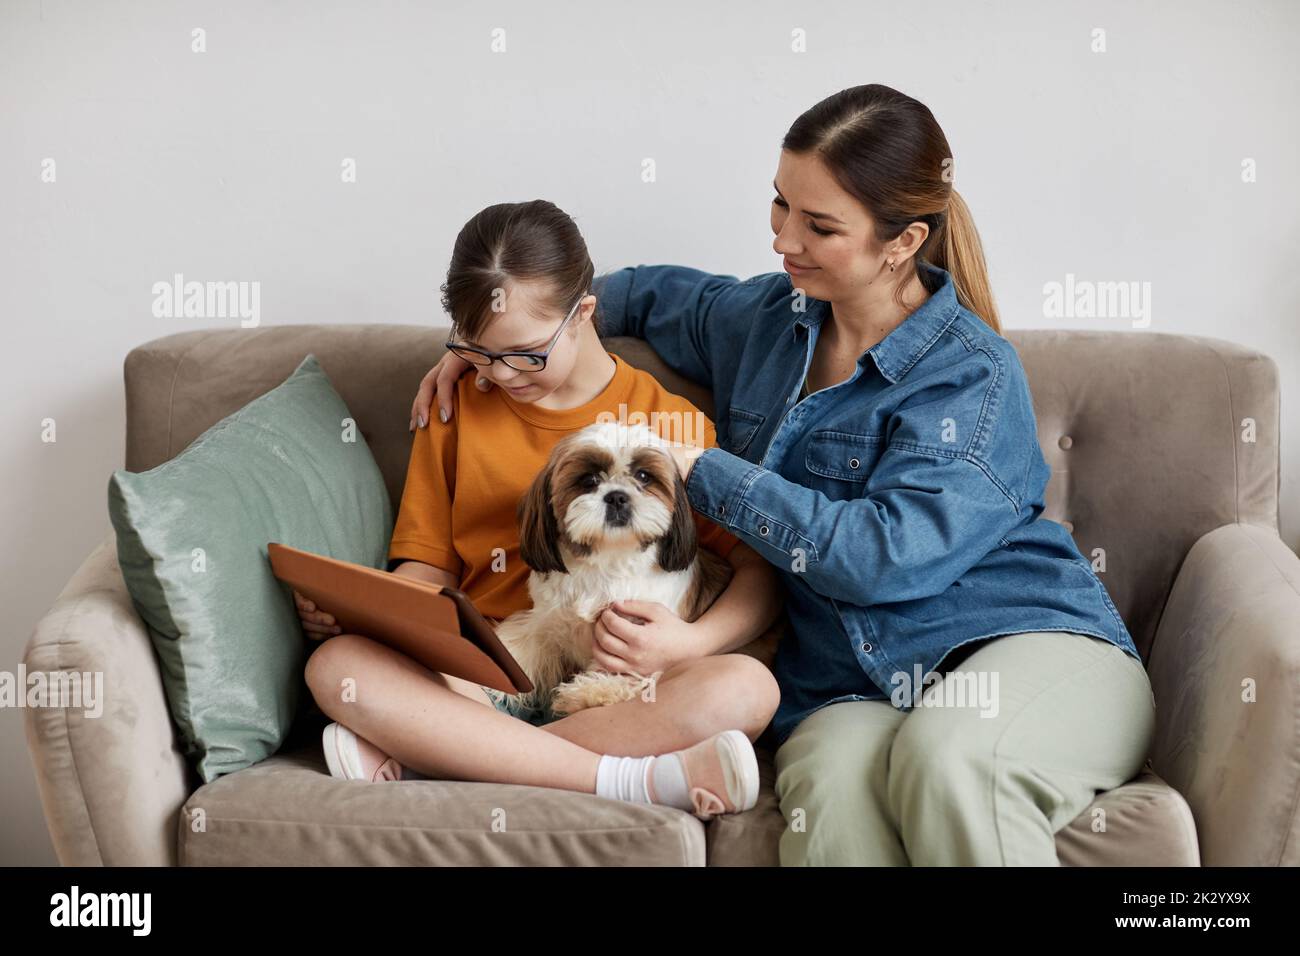 Minimal portrait of caring mother and daughter with Down syndrome sitting on couch with cute dog Stock Photo